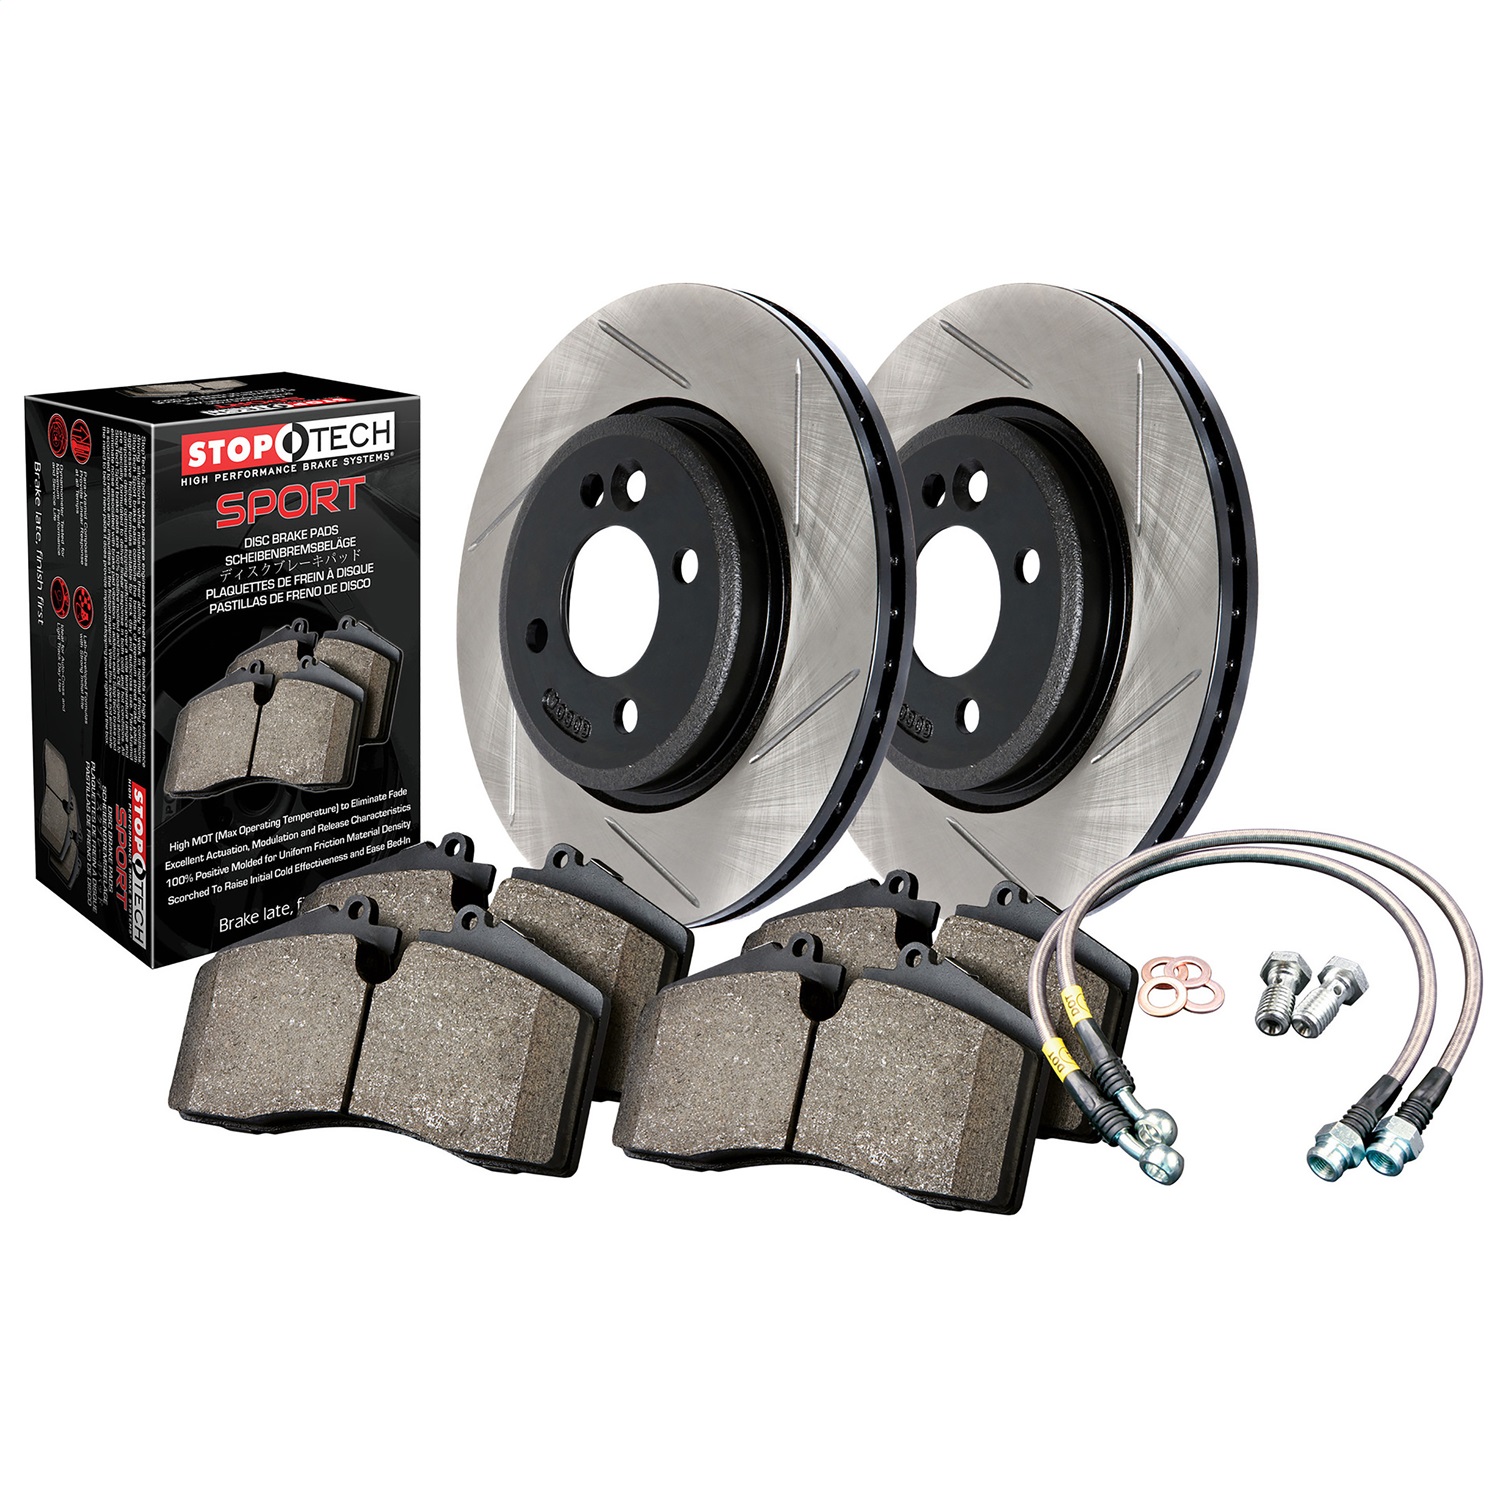 StopTech 977.40000R Sport Disc Brake Kit w/Slotted Rotors